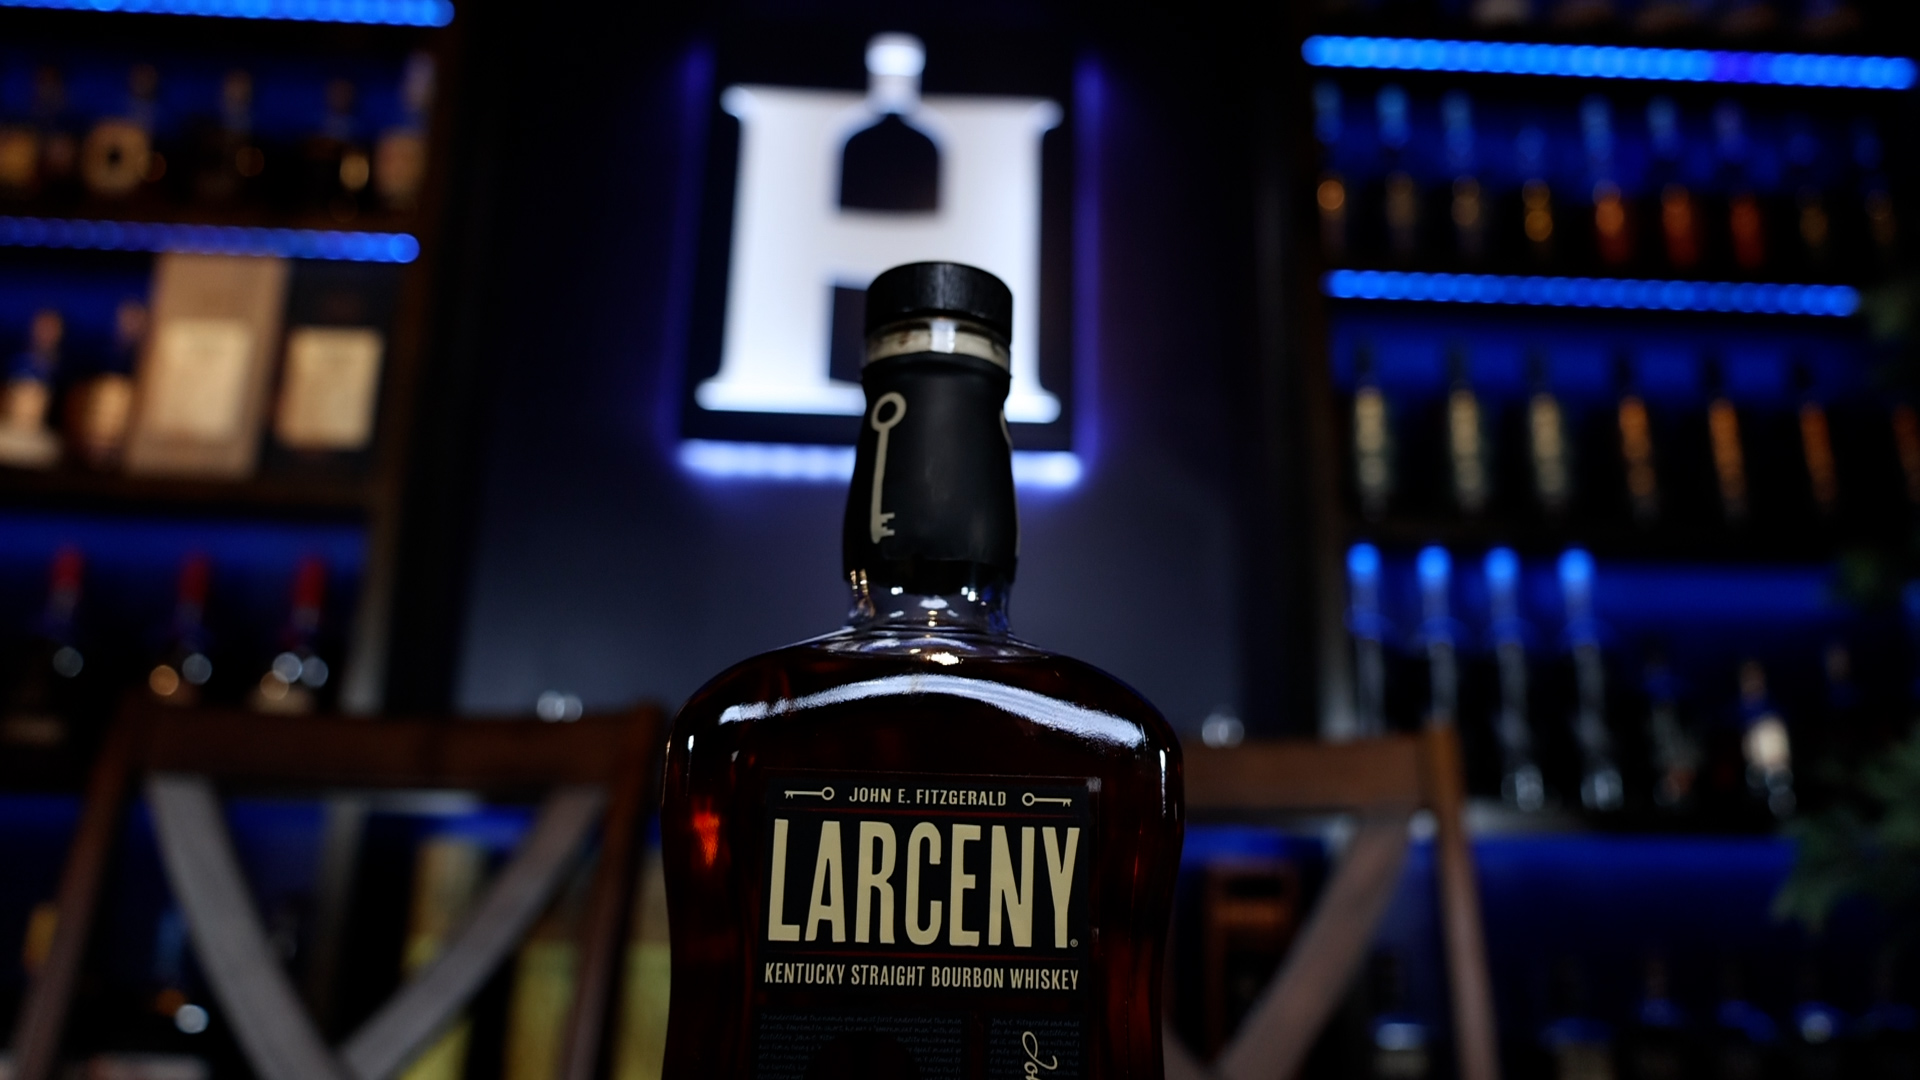 A bottle of Larceny Barrel Proof whiskey sits on a table in front of a lit-up Homebar.io logo sign.